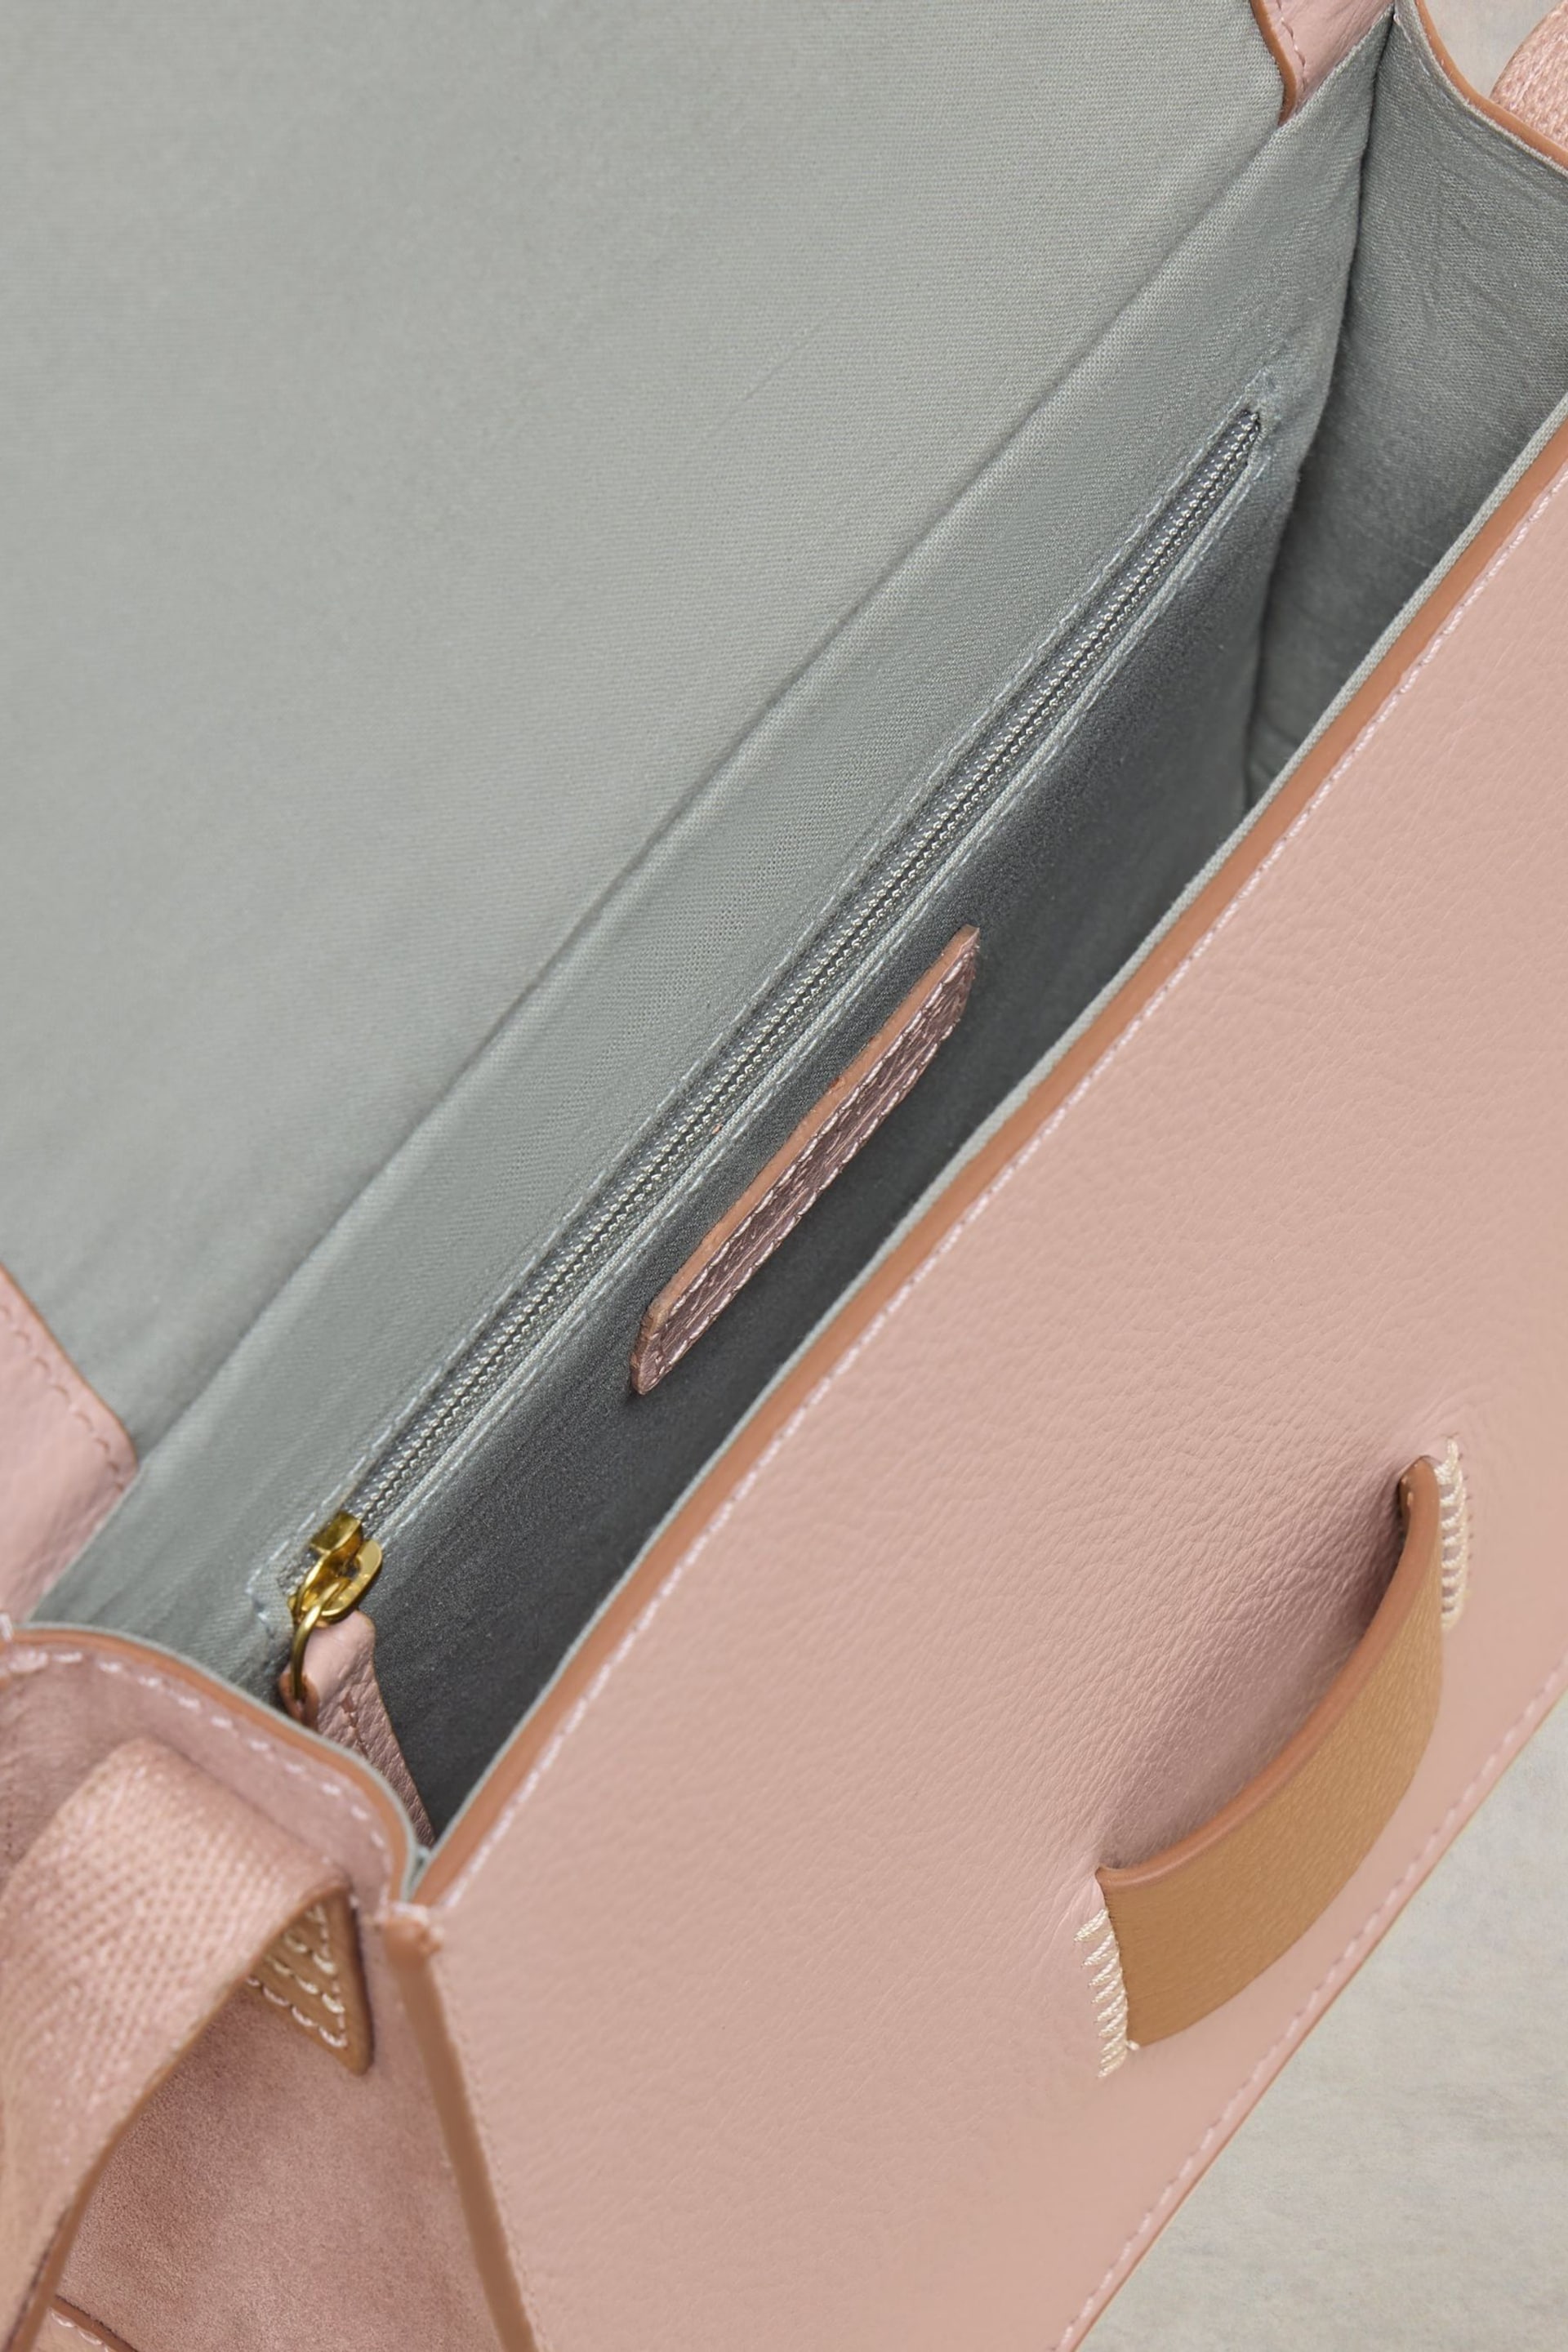 White Stuff Pink Evie Leather Satchel Bag - Image 4 of 4